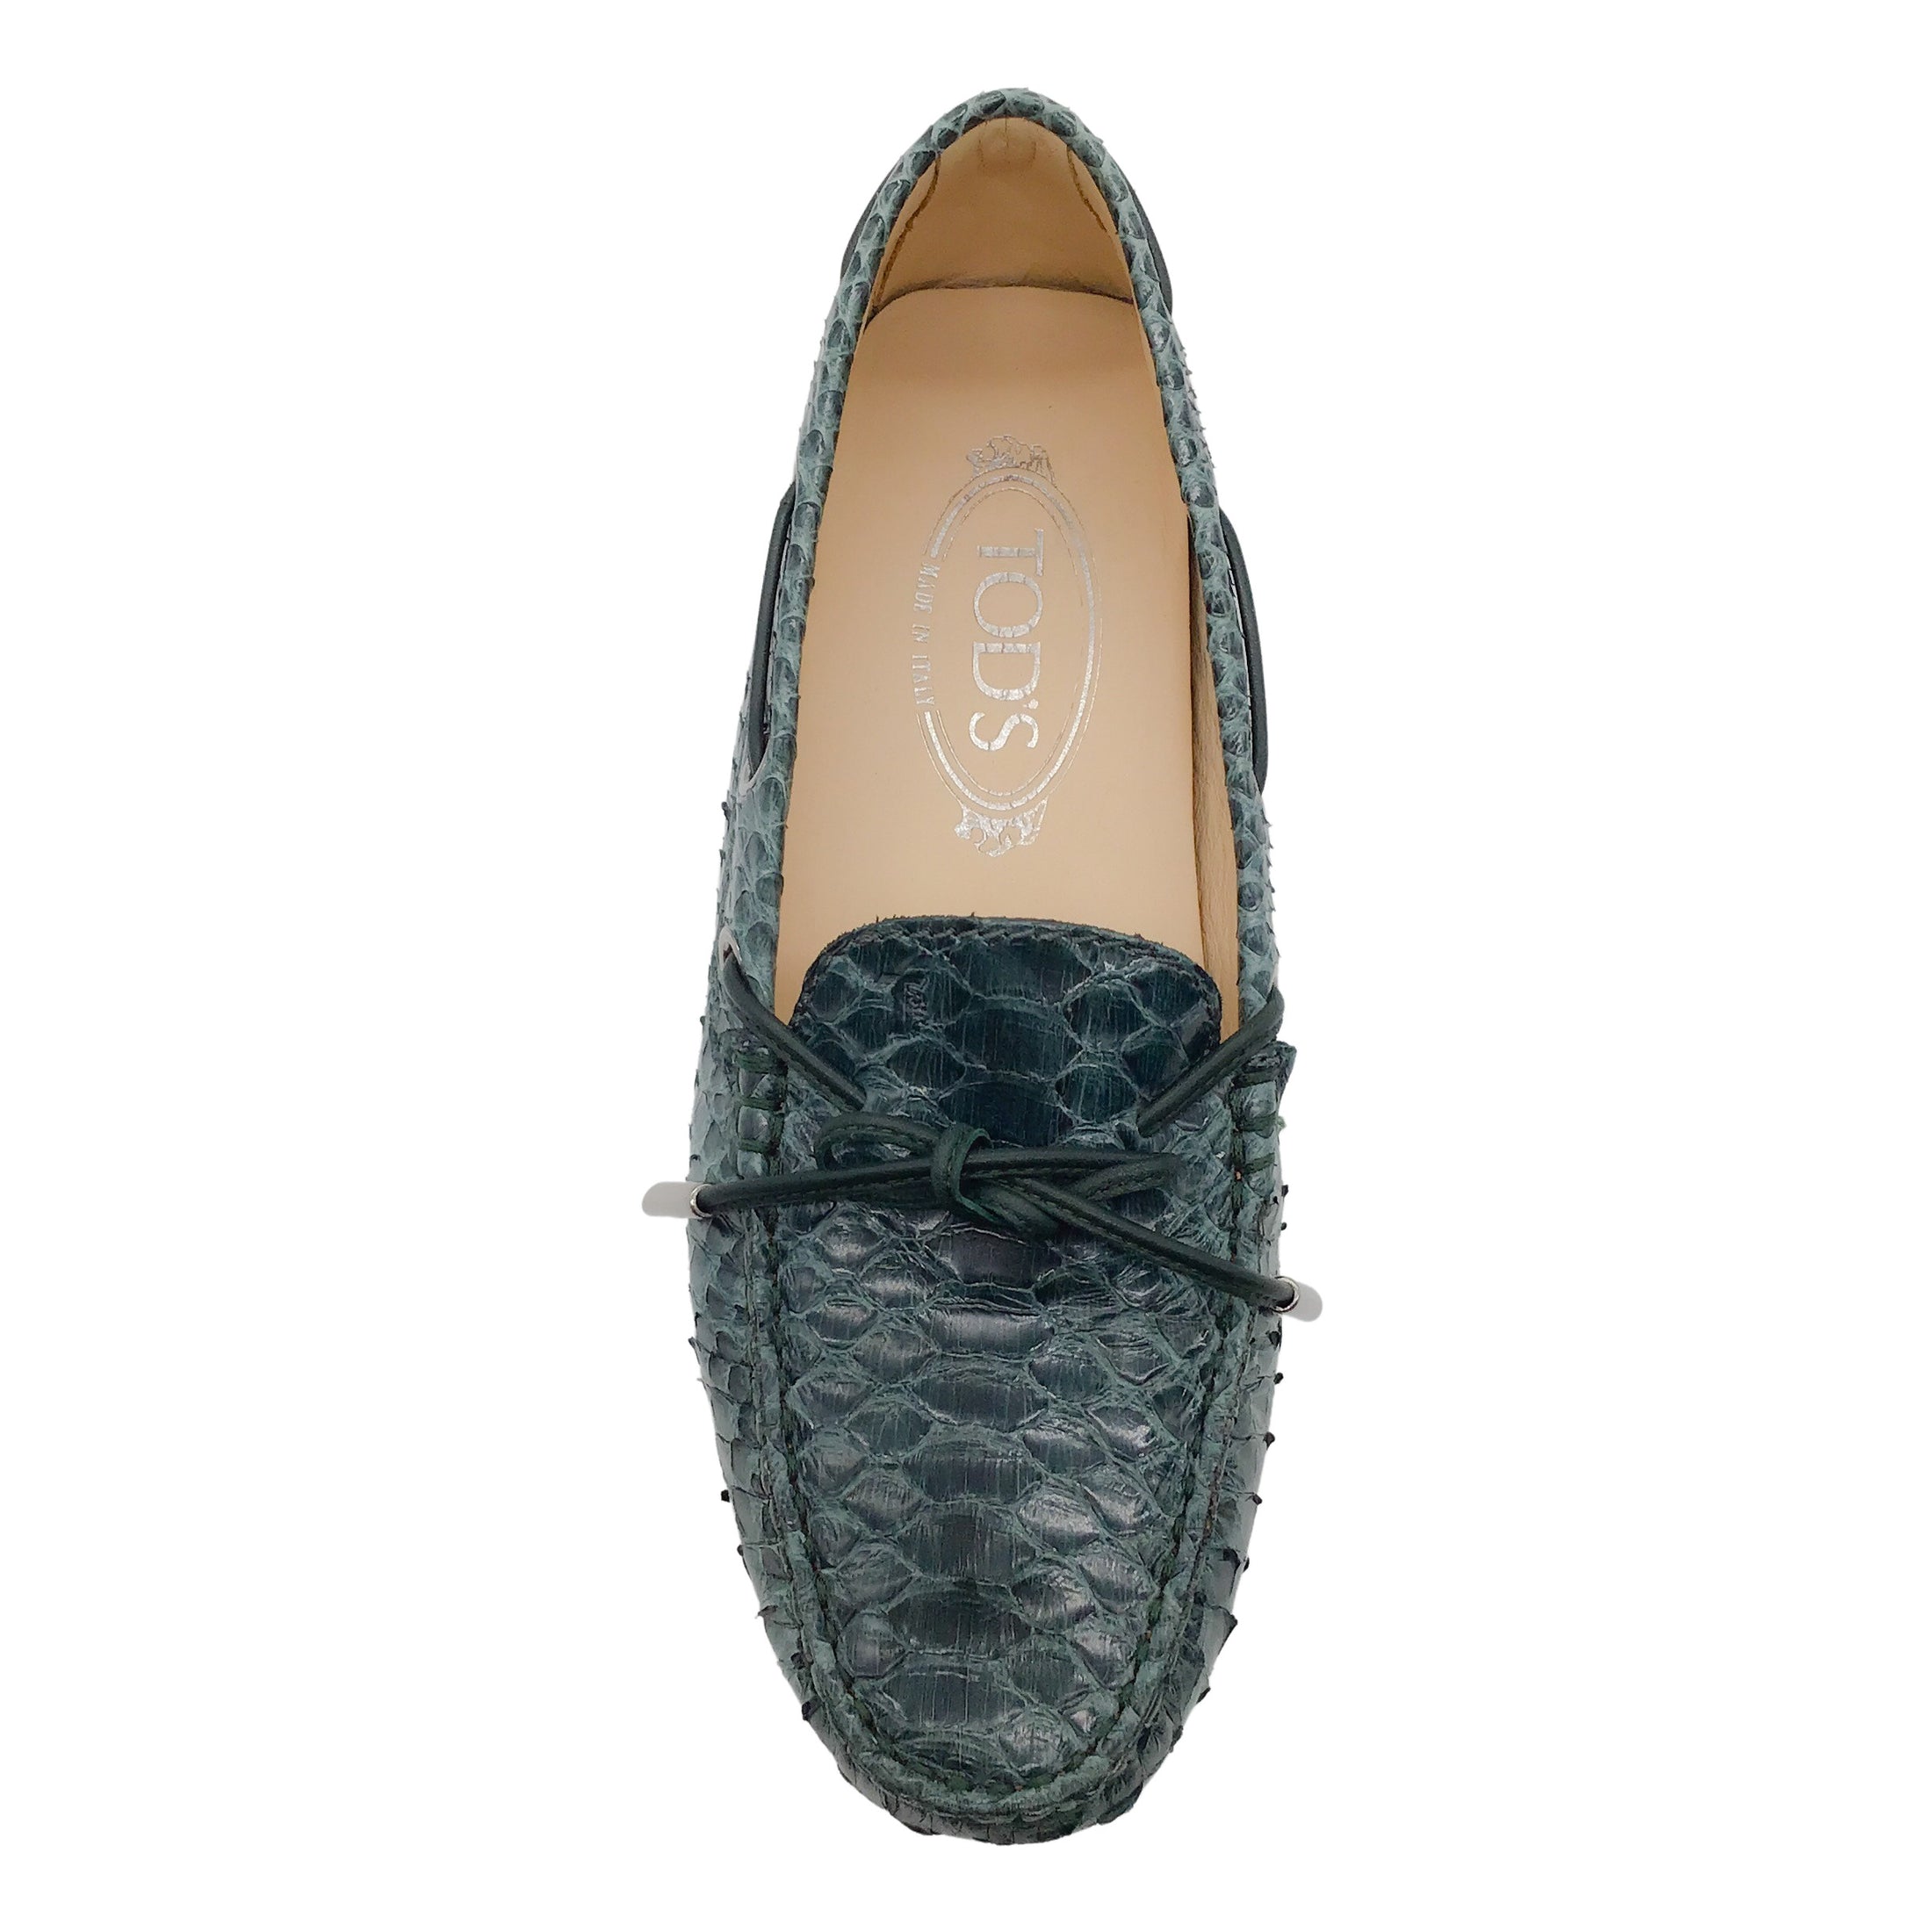 Tod's Teal Python Drivers Loafer Flats